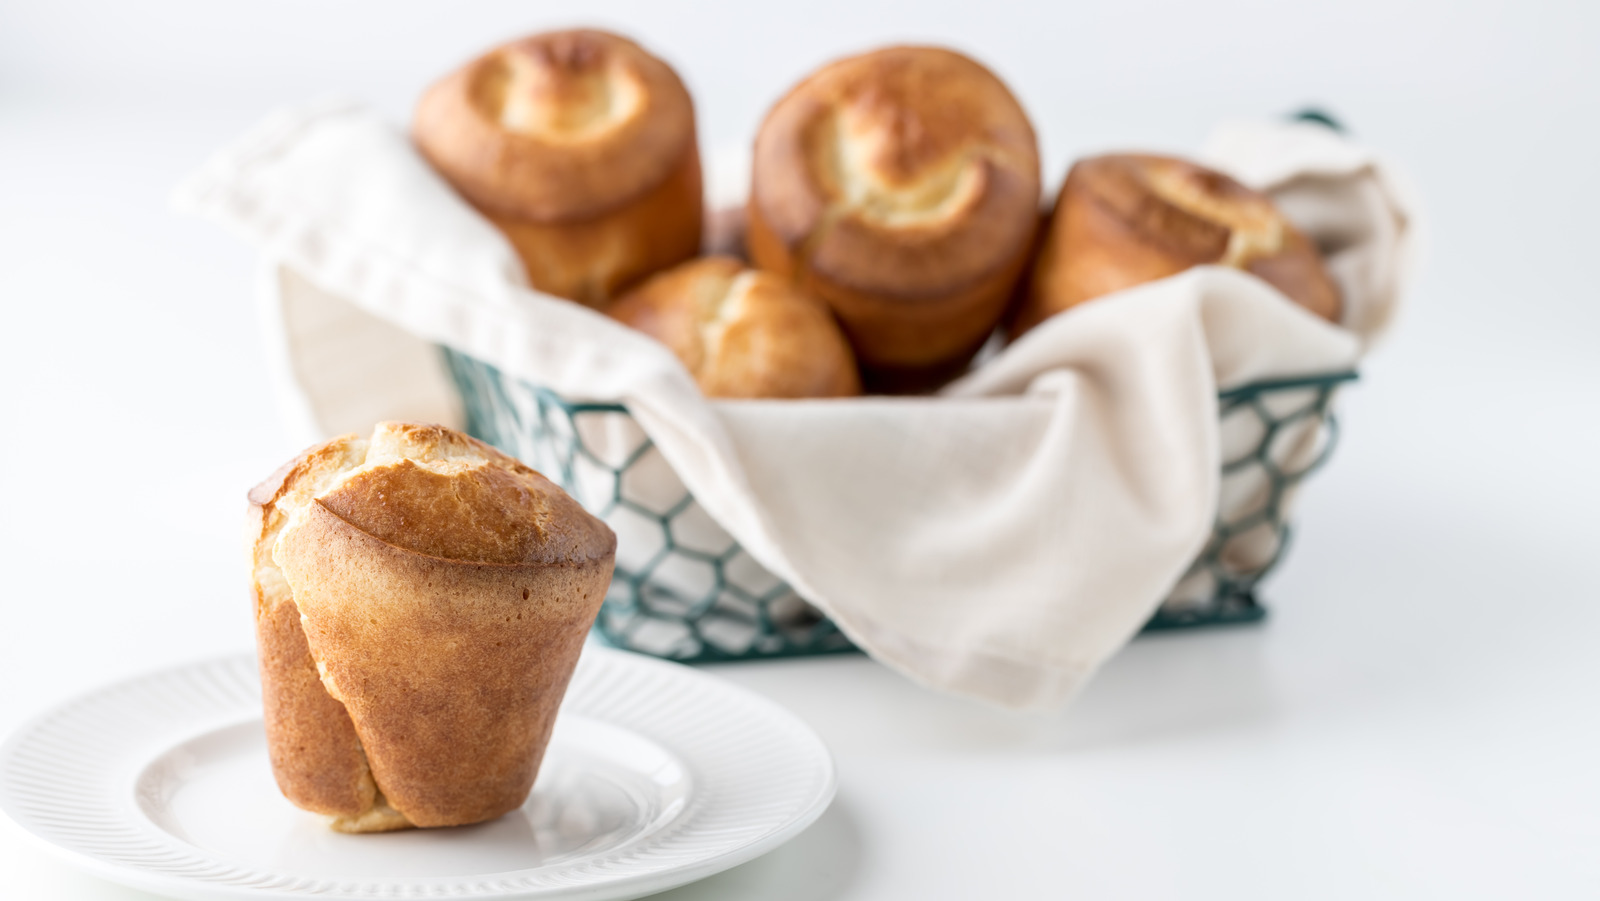 https://www.tastingtable.com/img/gallery/the-differences-between-popovers-and-yorkshire-puddings/l-intro-1667592350.jpg